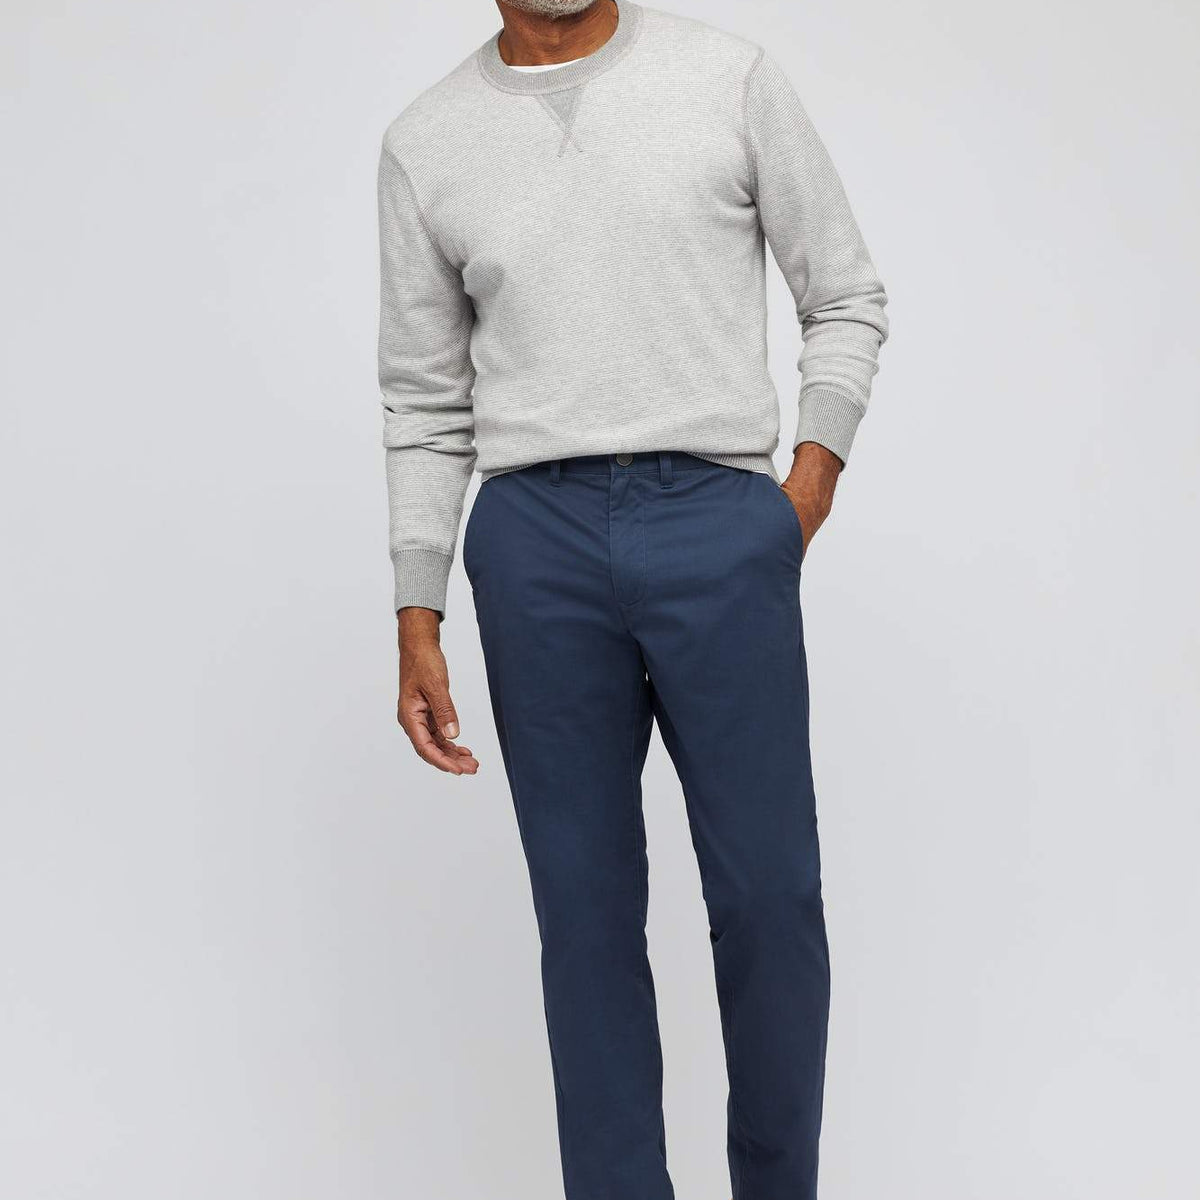 Bonobos Stretch Washed After Slim Chino- Midnights